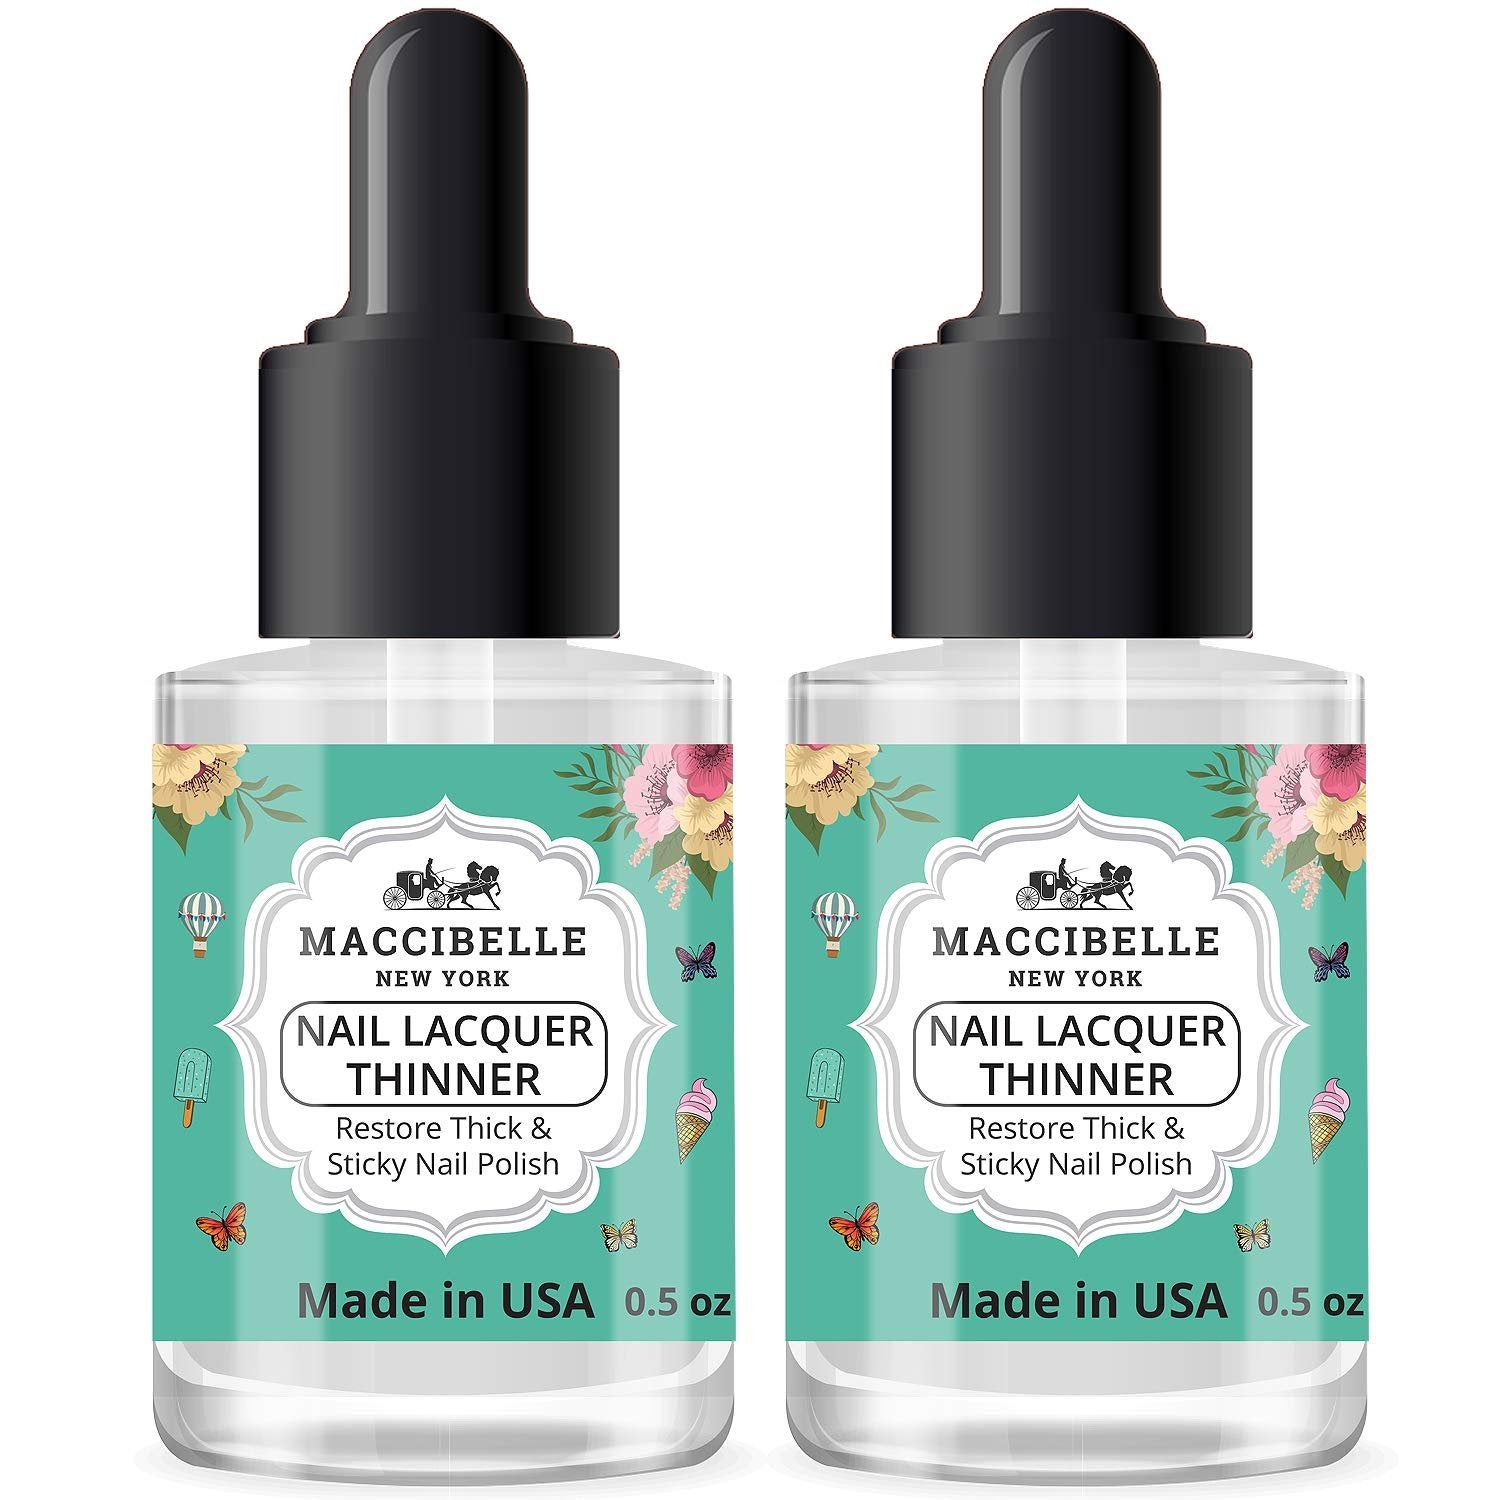 Maccibelle Nail Lacquer Thinner 0.5 oz - Thin and restore thick and goopy nail polish